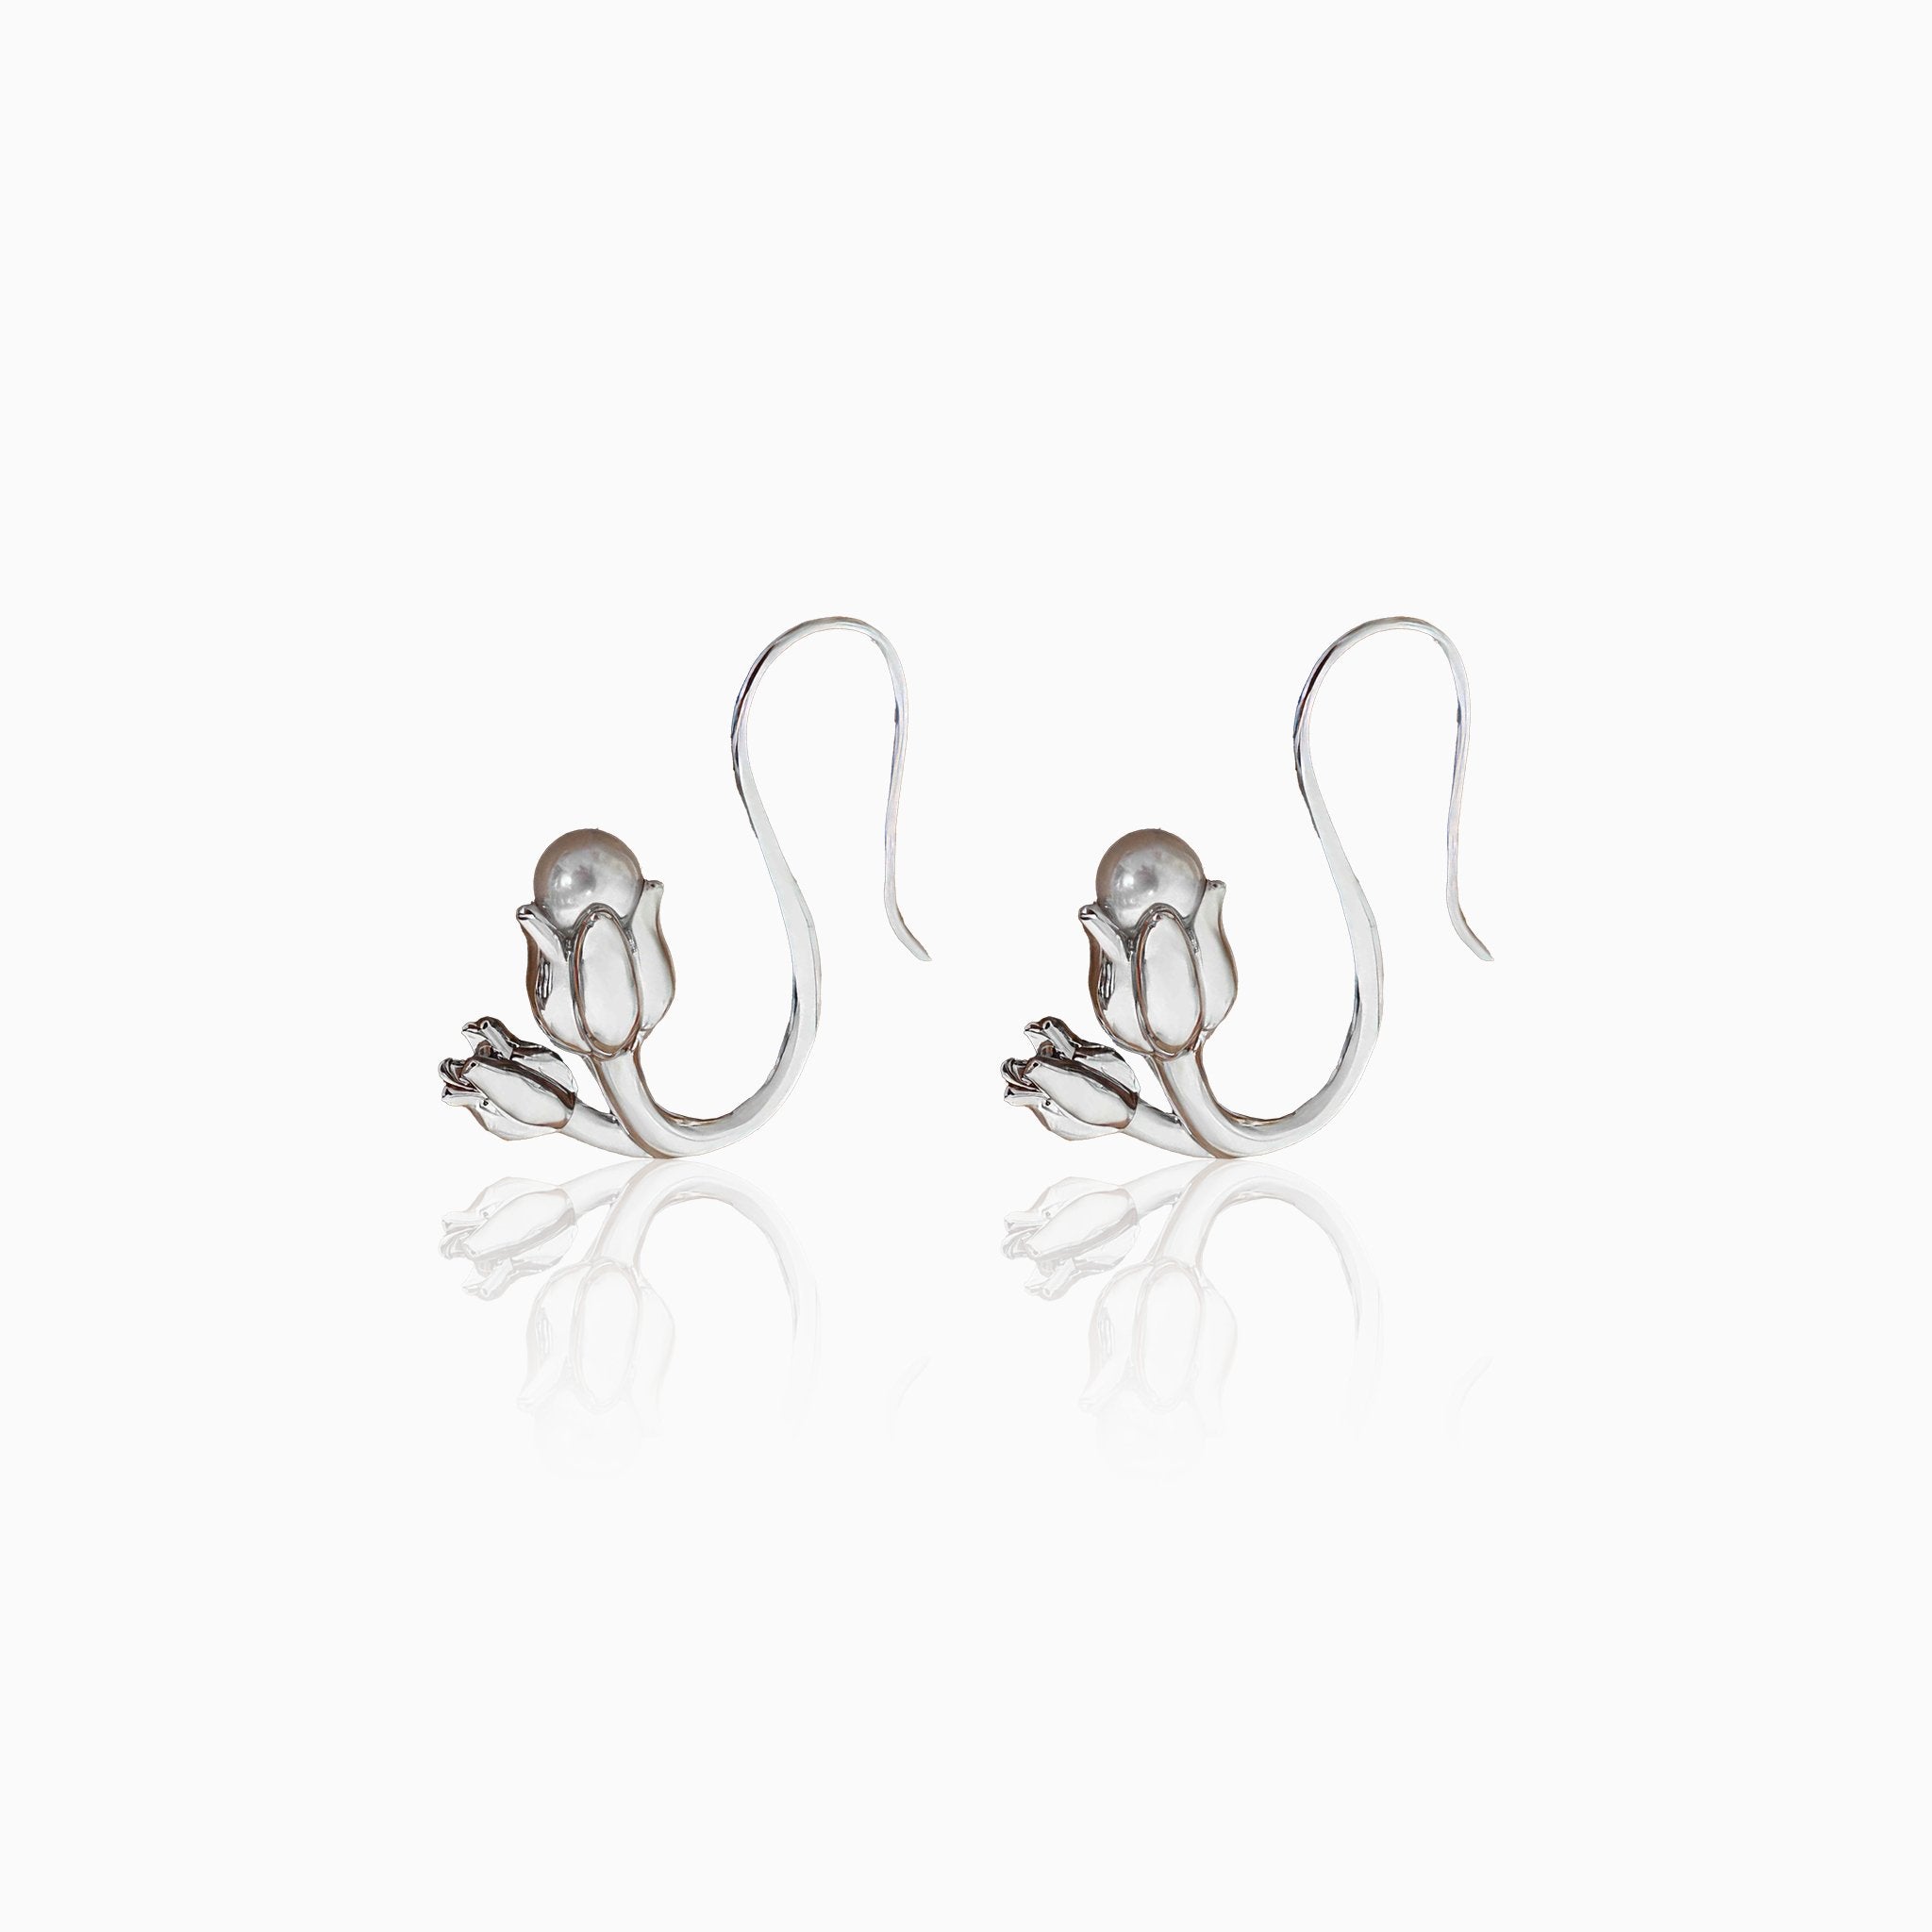 Tulip & Pearl Earrings - Nobbier - Earring - 18K Gold And Titanium PVD Coated Jewelry